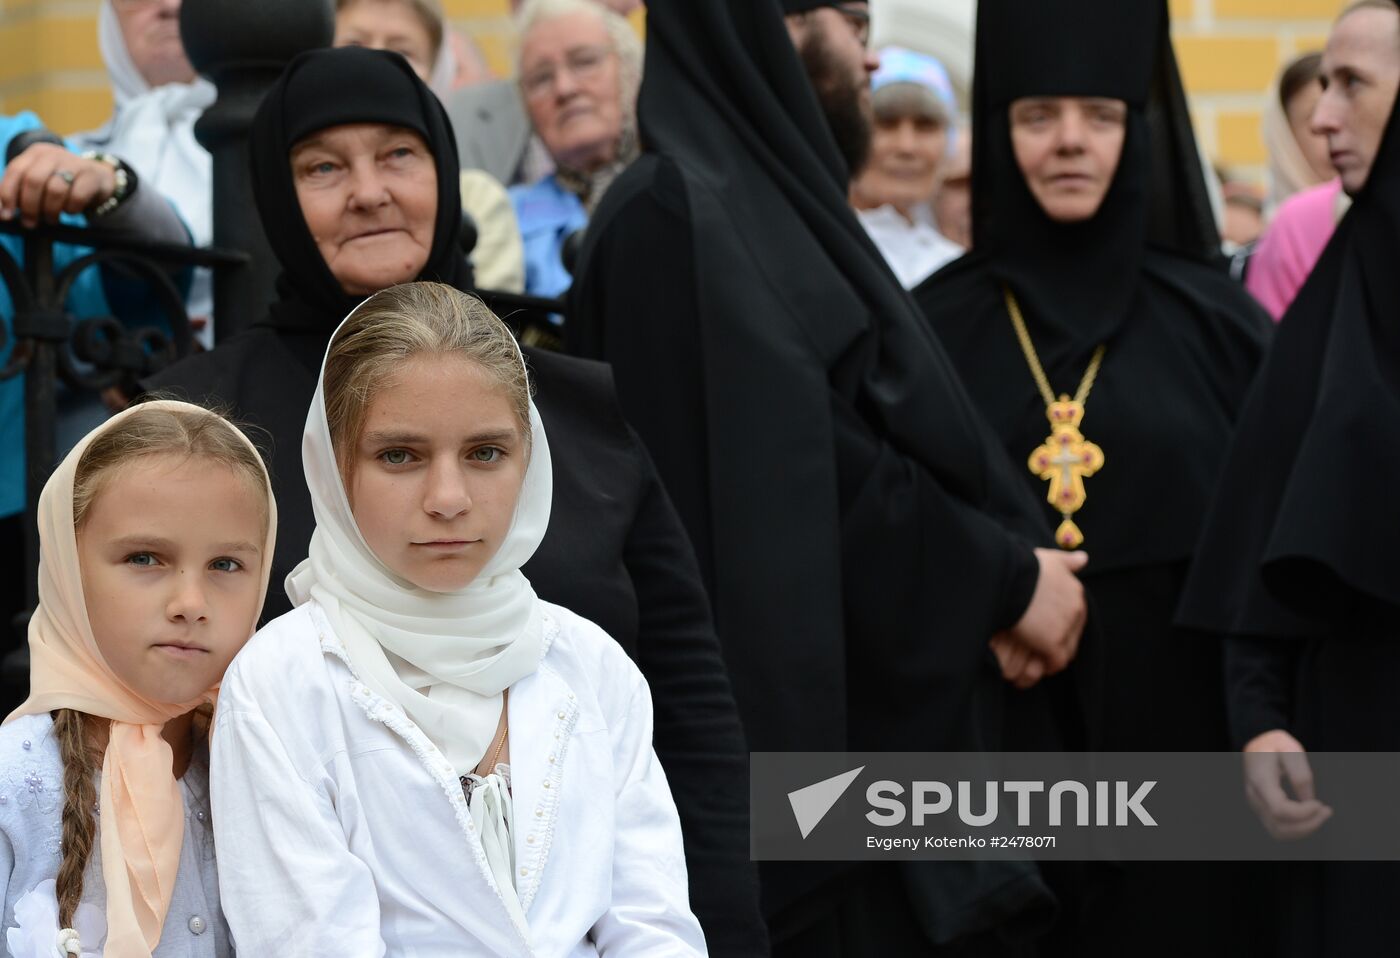 Primate of Moscow Patriarchate's Ukrainian Orthodox Church enthroned